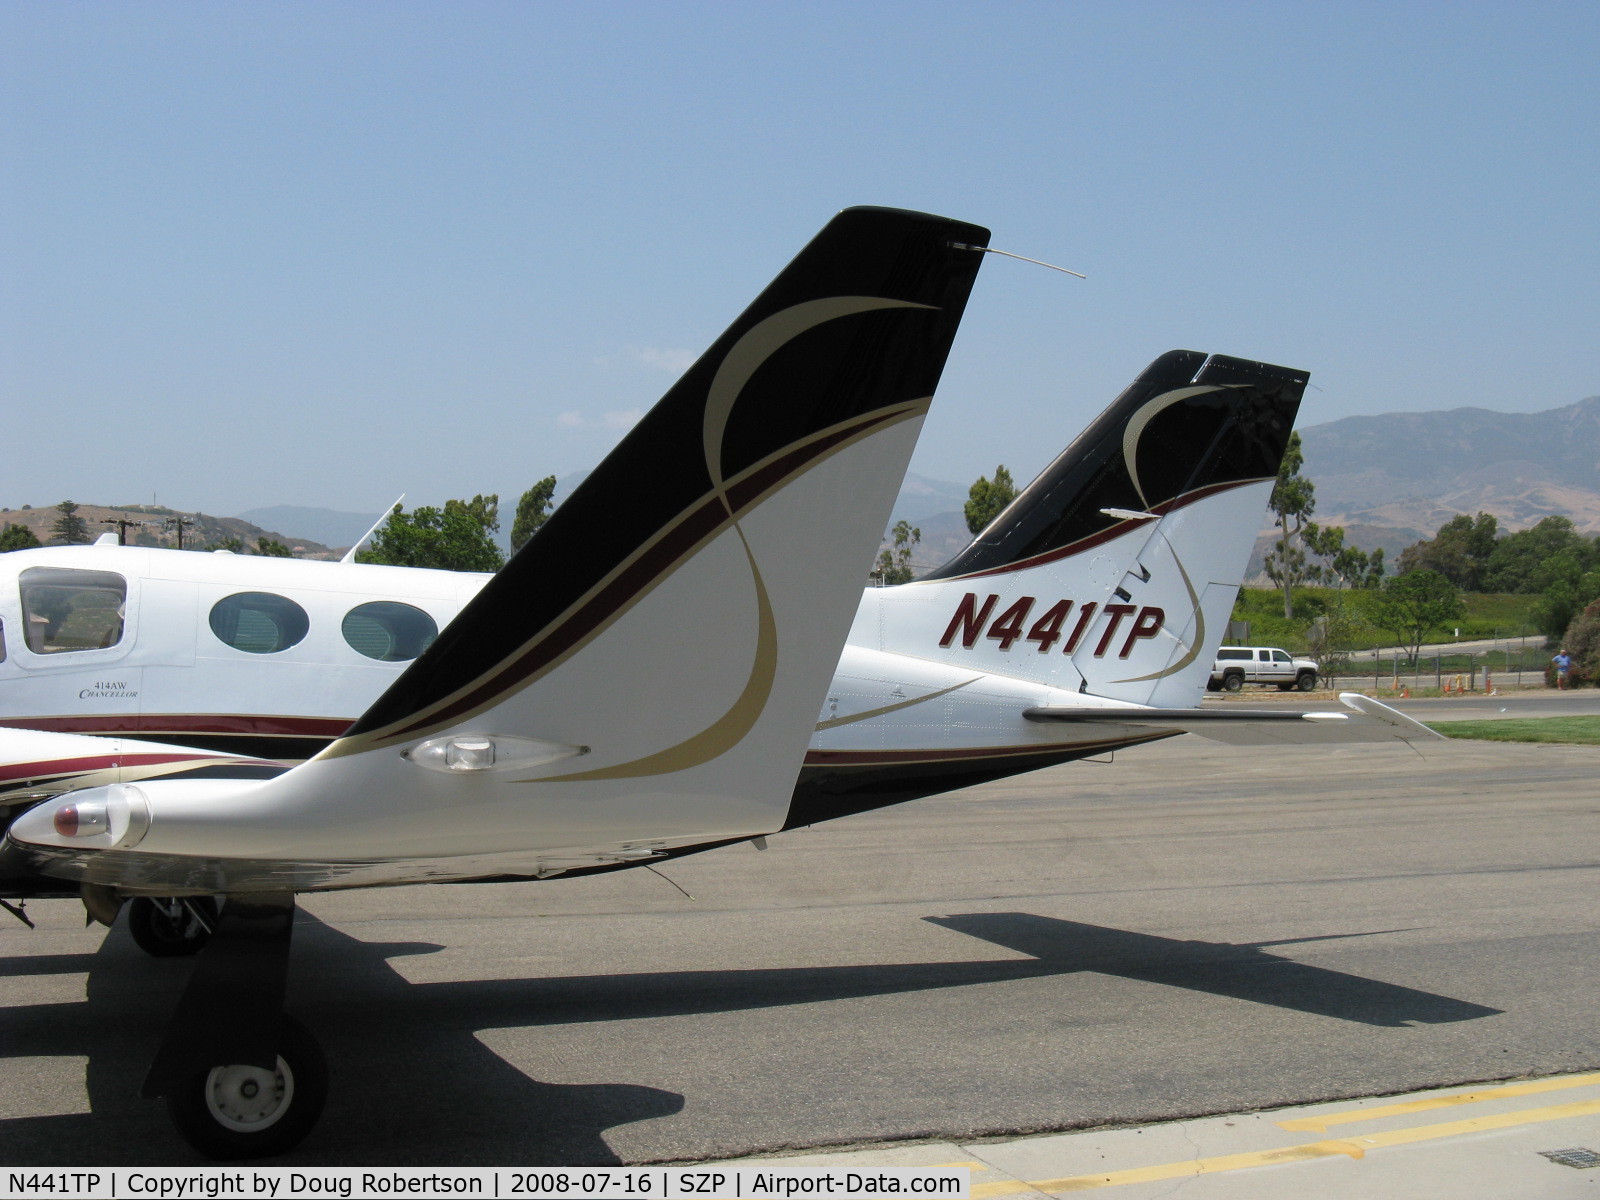 N441TP, 1978 Cessna 414A Chancellor C/N 414A0057, 1978 Cessna 414A CHANCELLOR, two Continental TSIO-520-NB turbocharged 310 Hp each, bonded wet wing, cabin pressure 6,000' to 20,000', winglet mod closeup